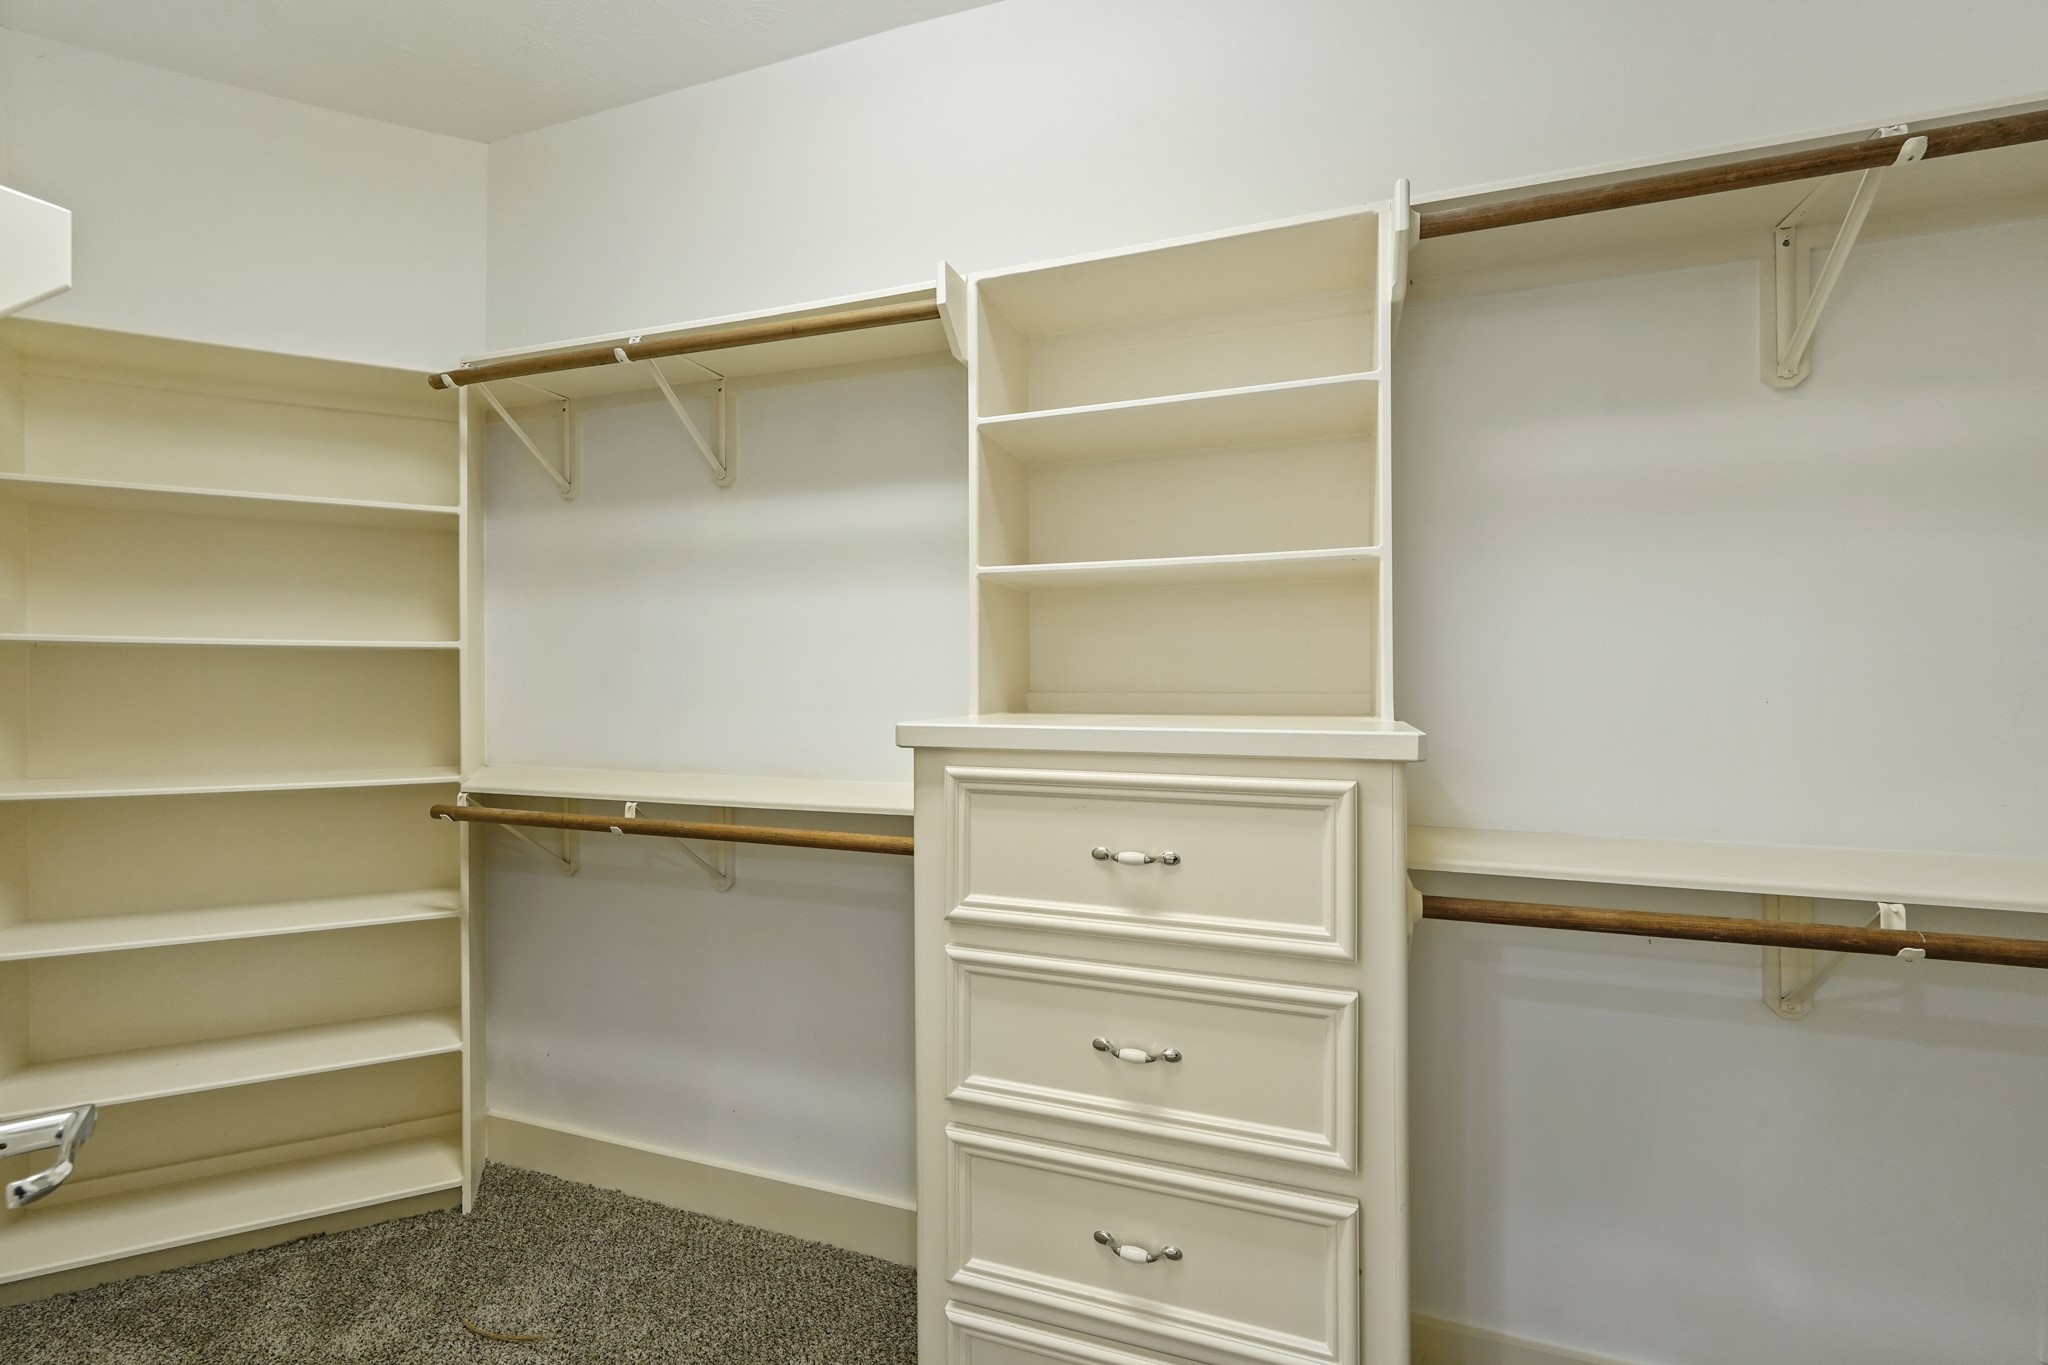 Primary closet with built in shelves and chest